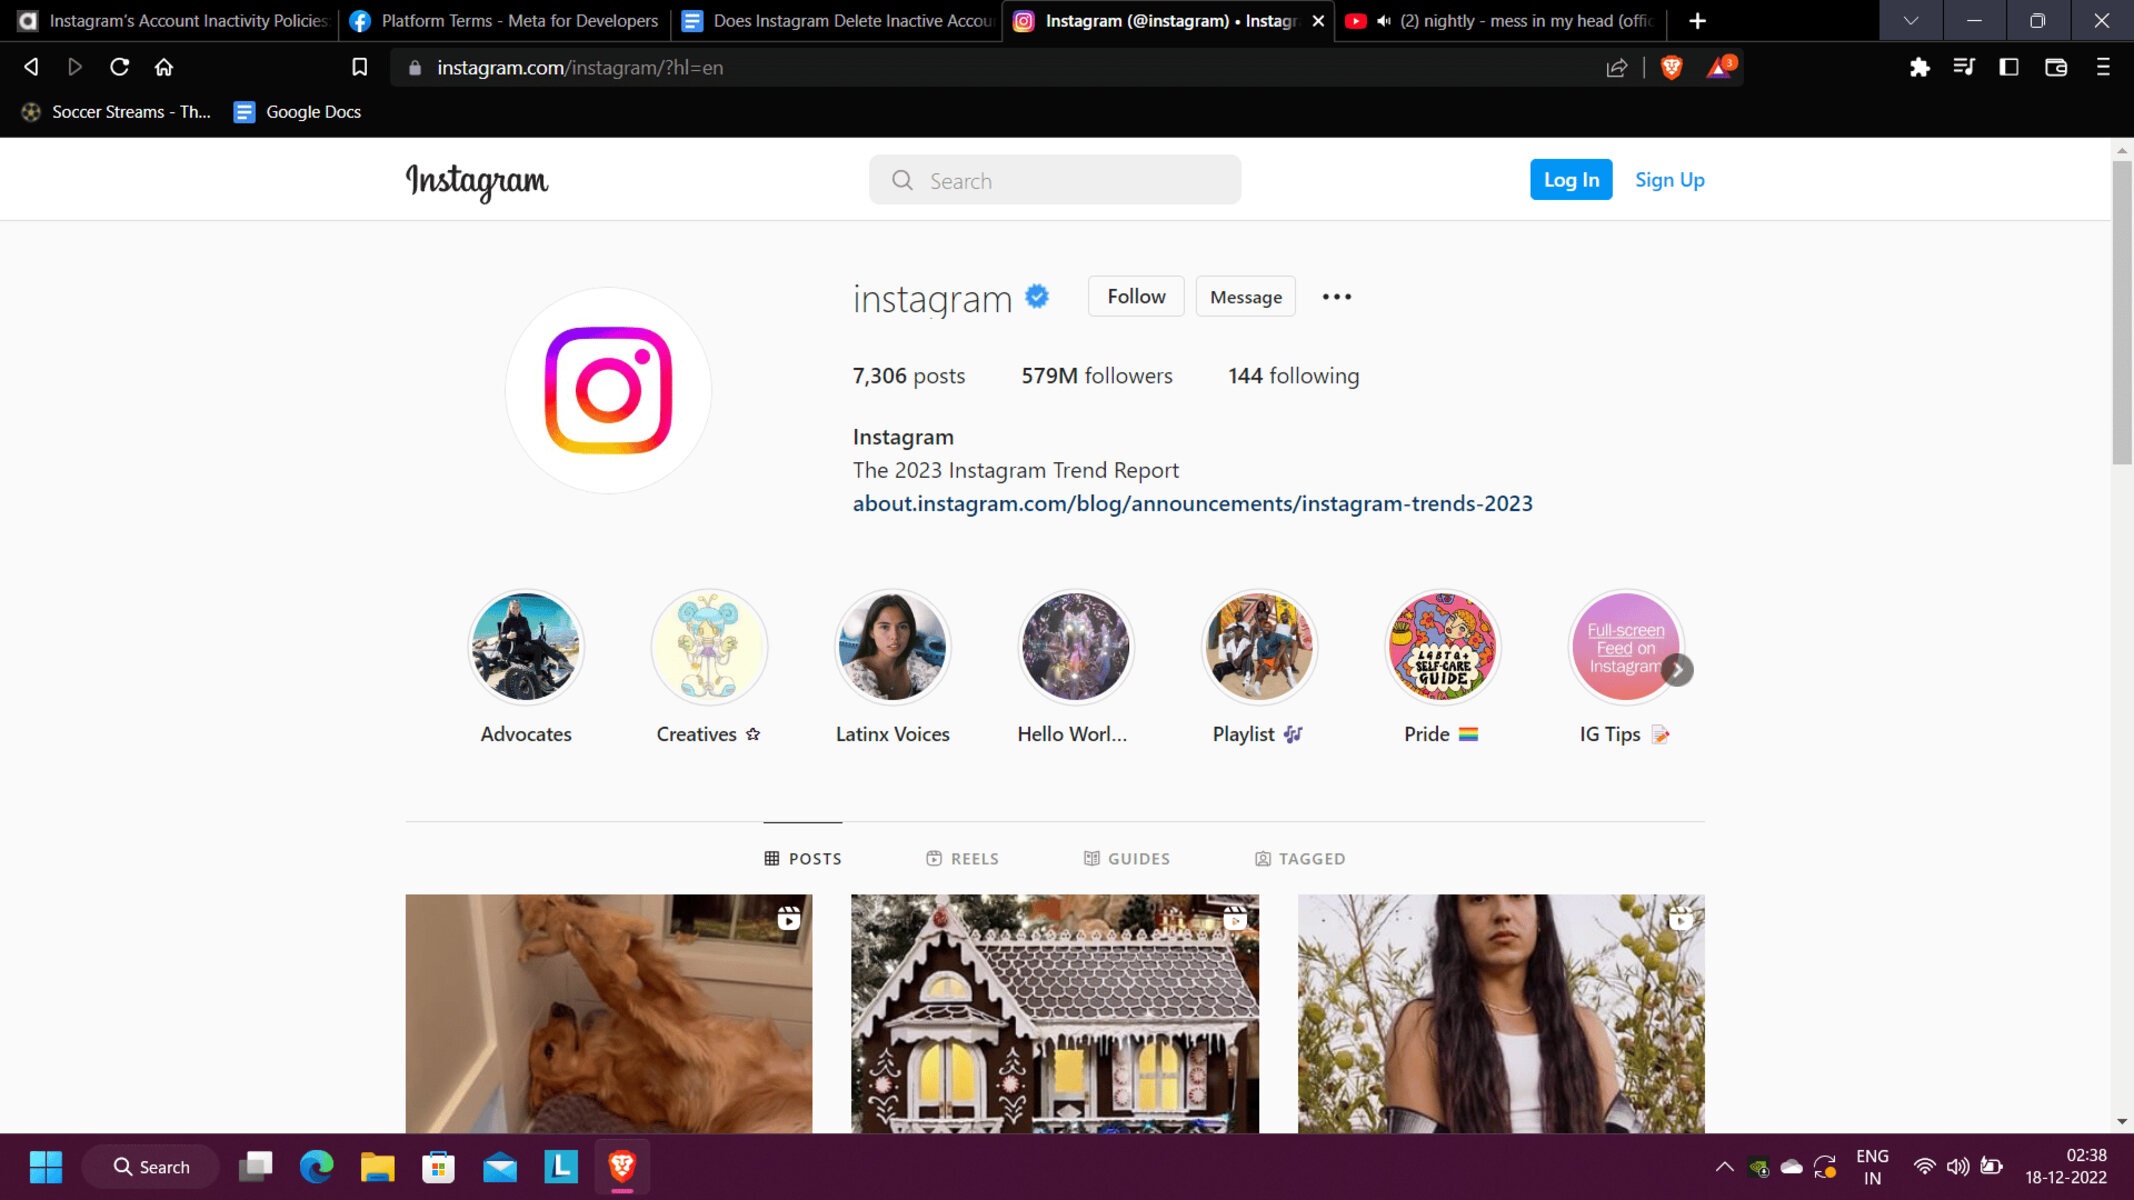 What To Know About Instagram Inactive Or Deleted Account Policies